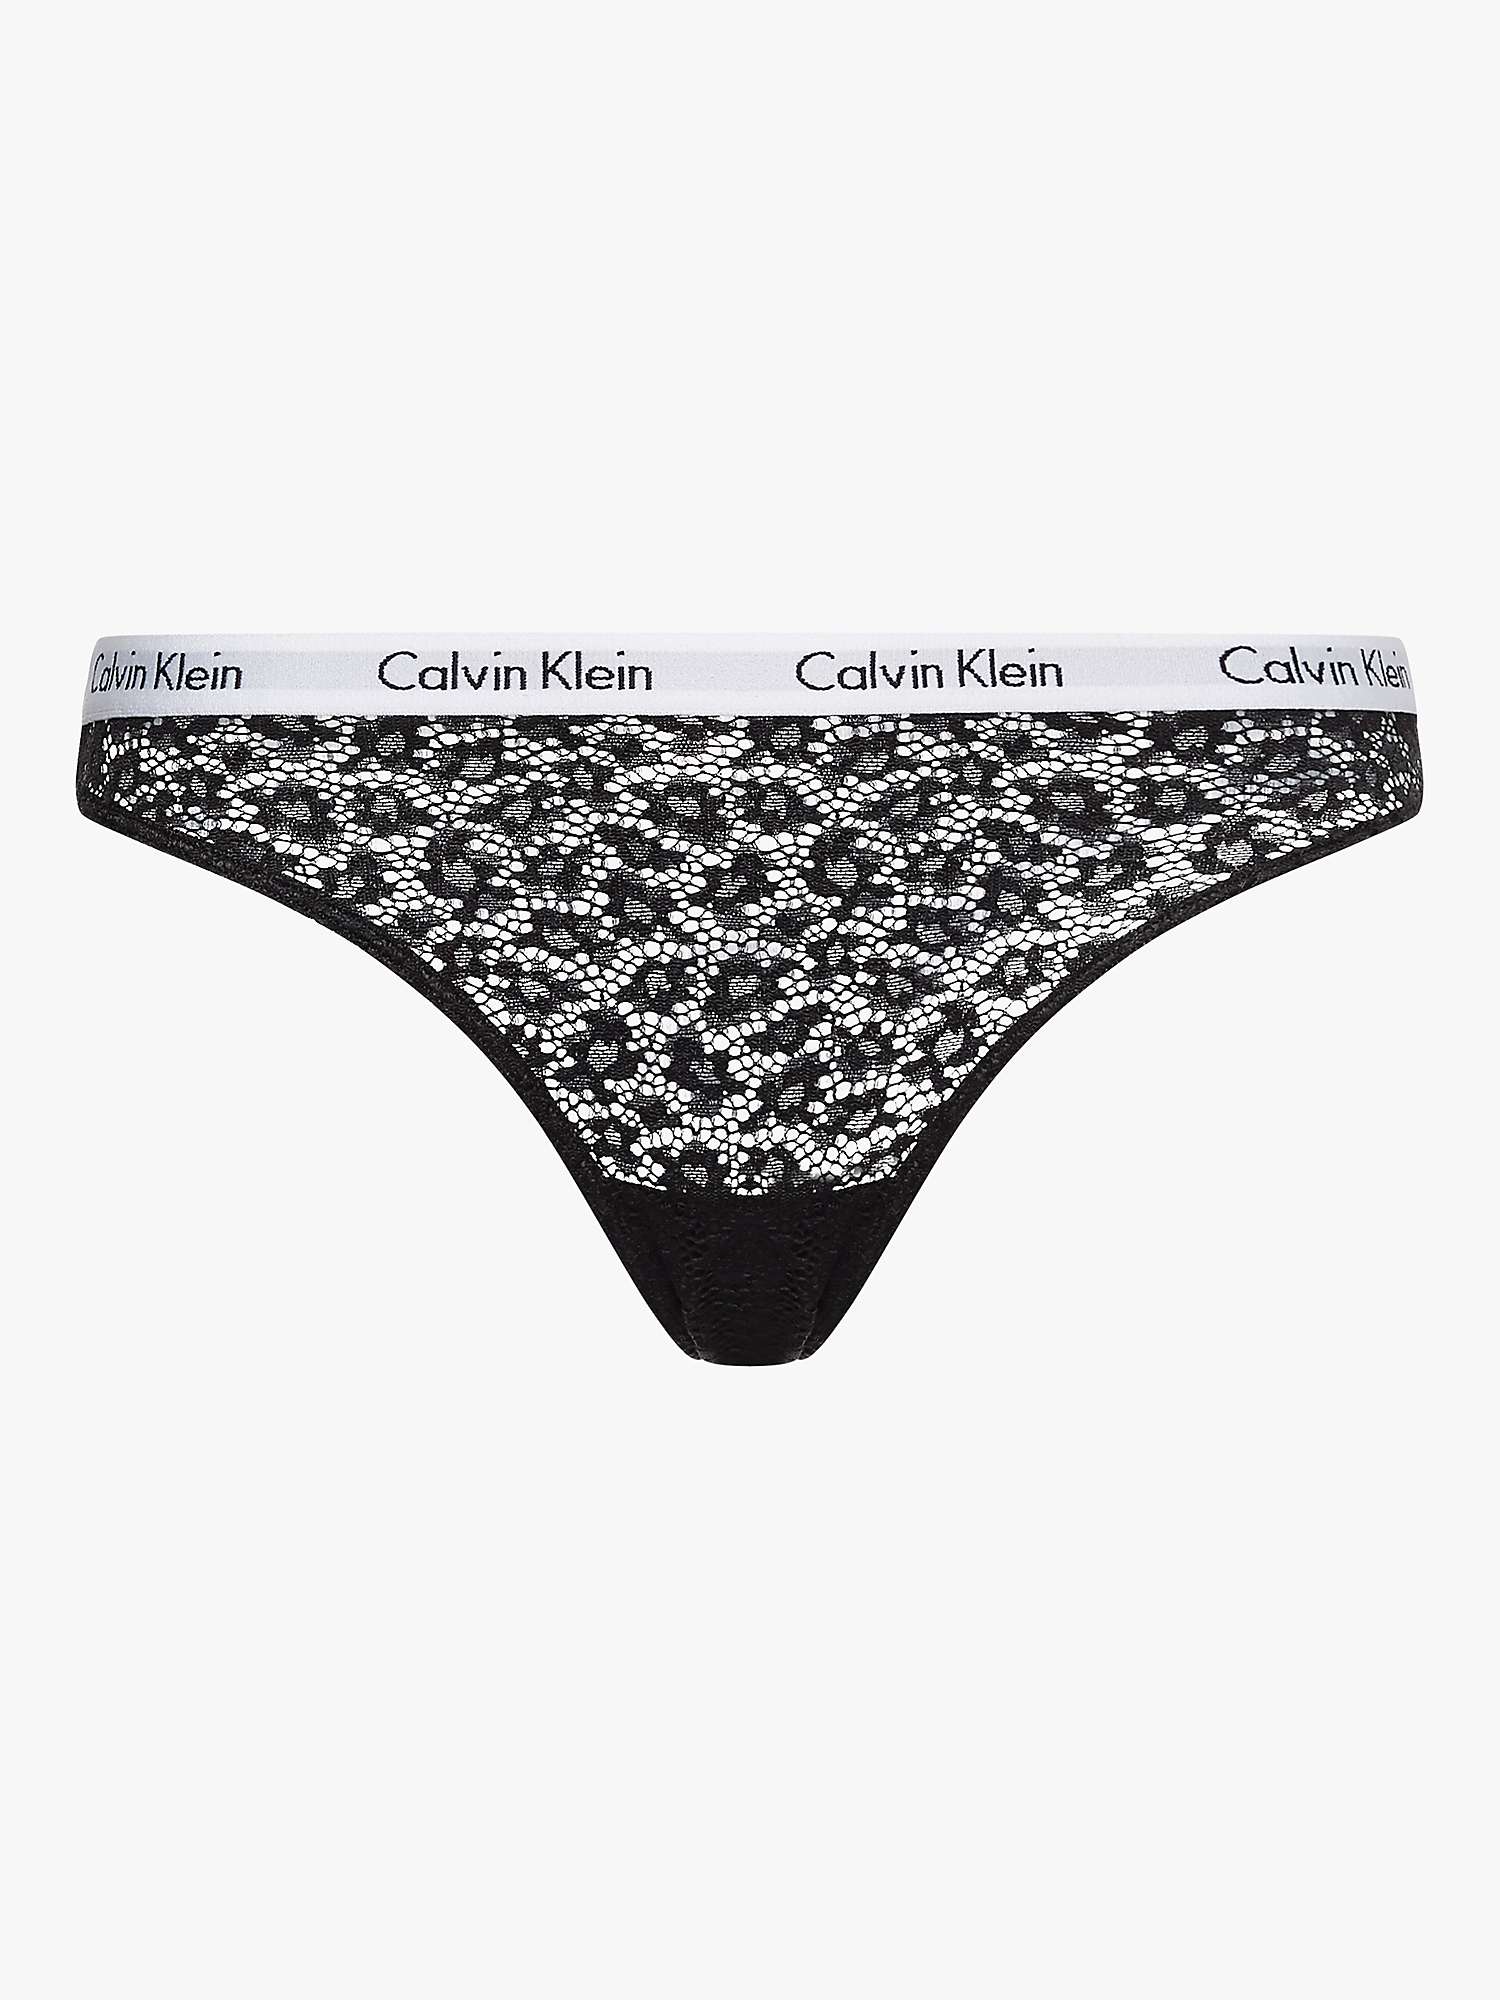 Buy Calvin Klein Carousel Lace Brazilian Knickers Online at johnlewis.com